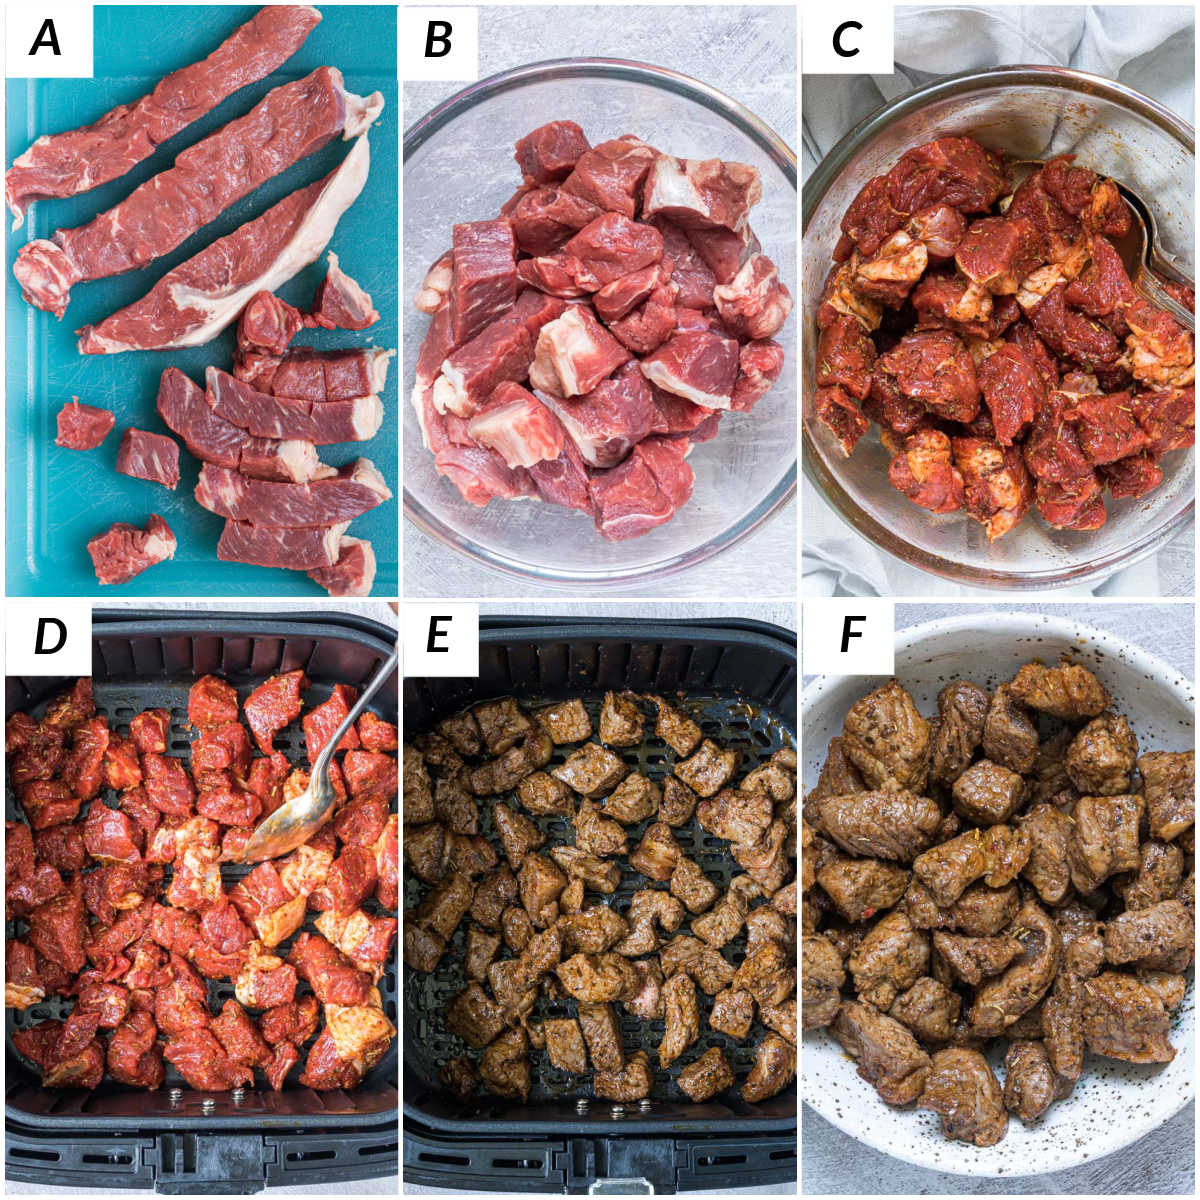 image collage showing the steps for making air fryer steak bites